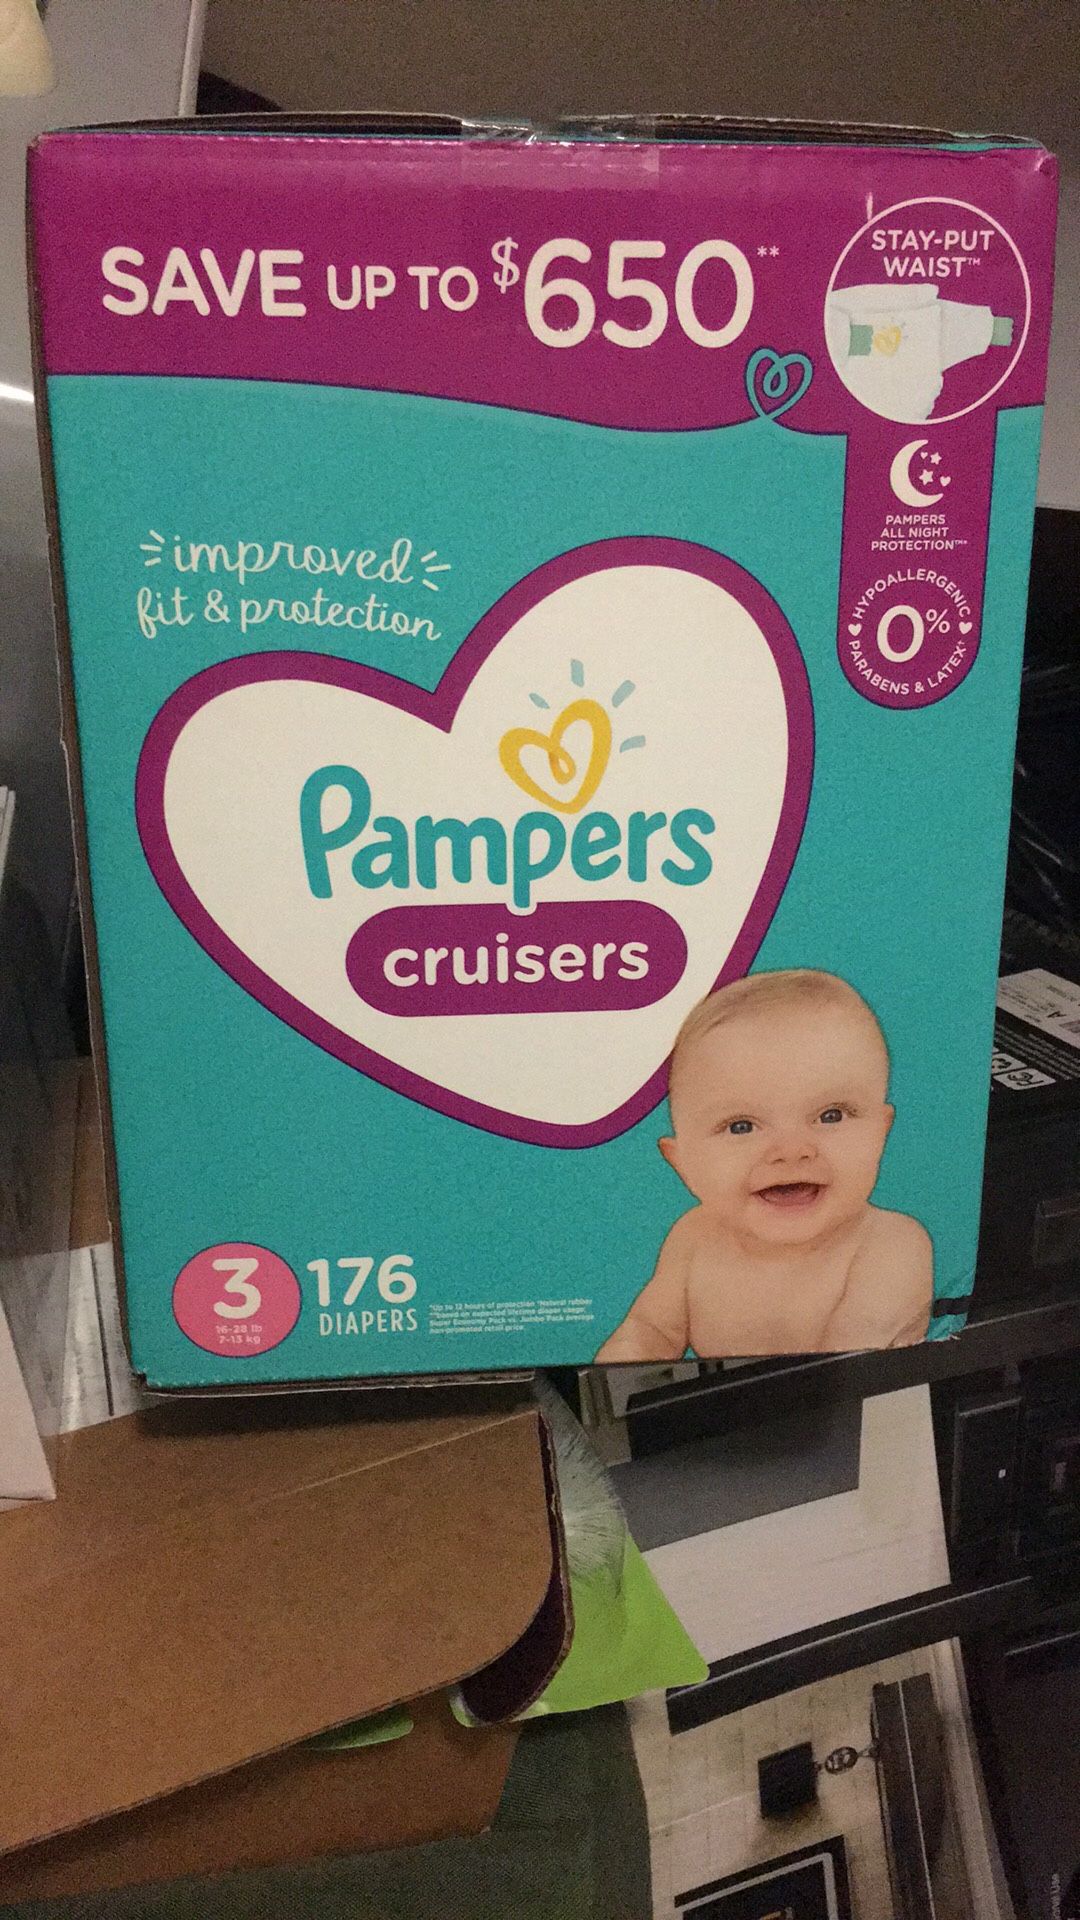 Pampers cruisers diaper size 3 176 counts and free 8 packs of huggies wipes